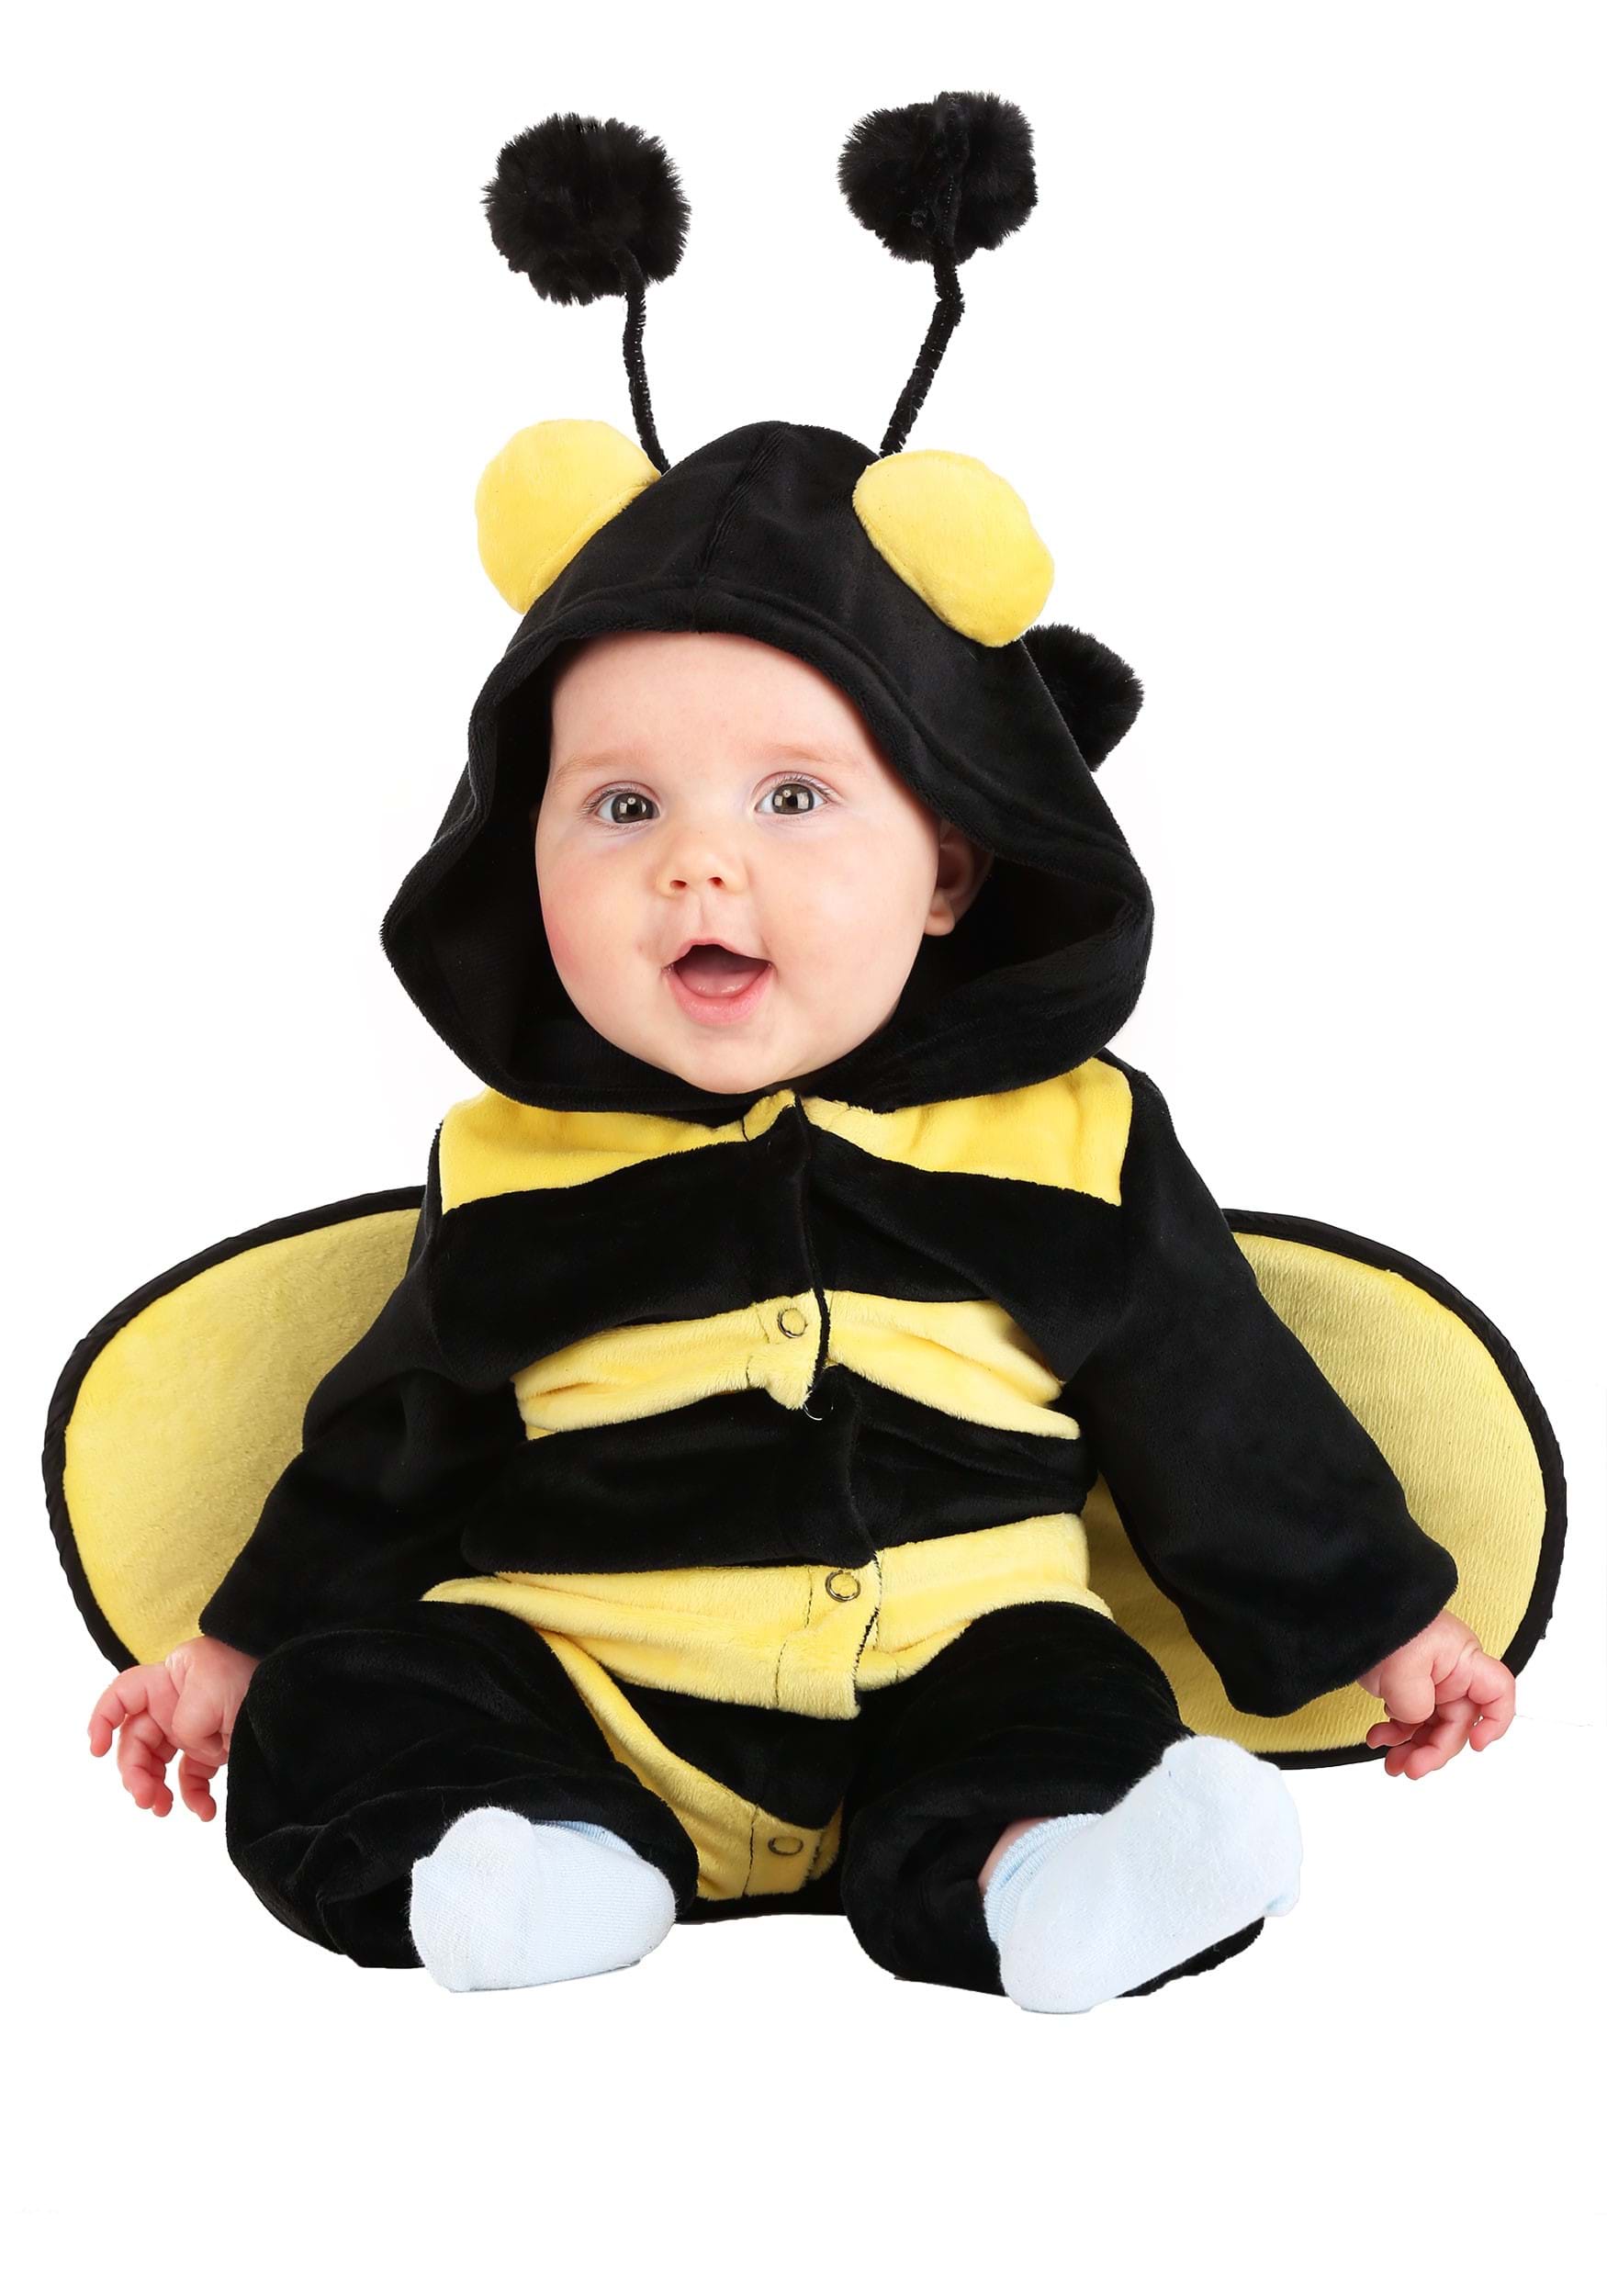 Photos - Fancy Dress FUN Costumes Buzzing Bumble Bee Costume for Infants | Infant Costumes Blac